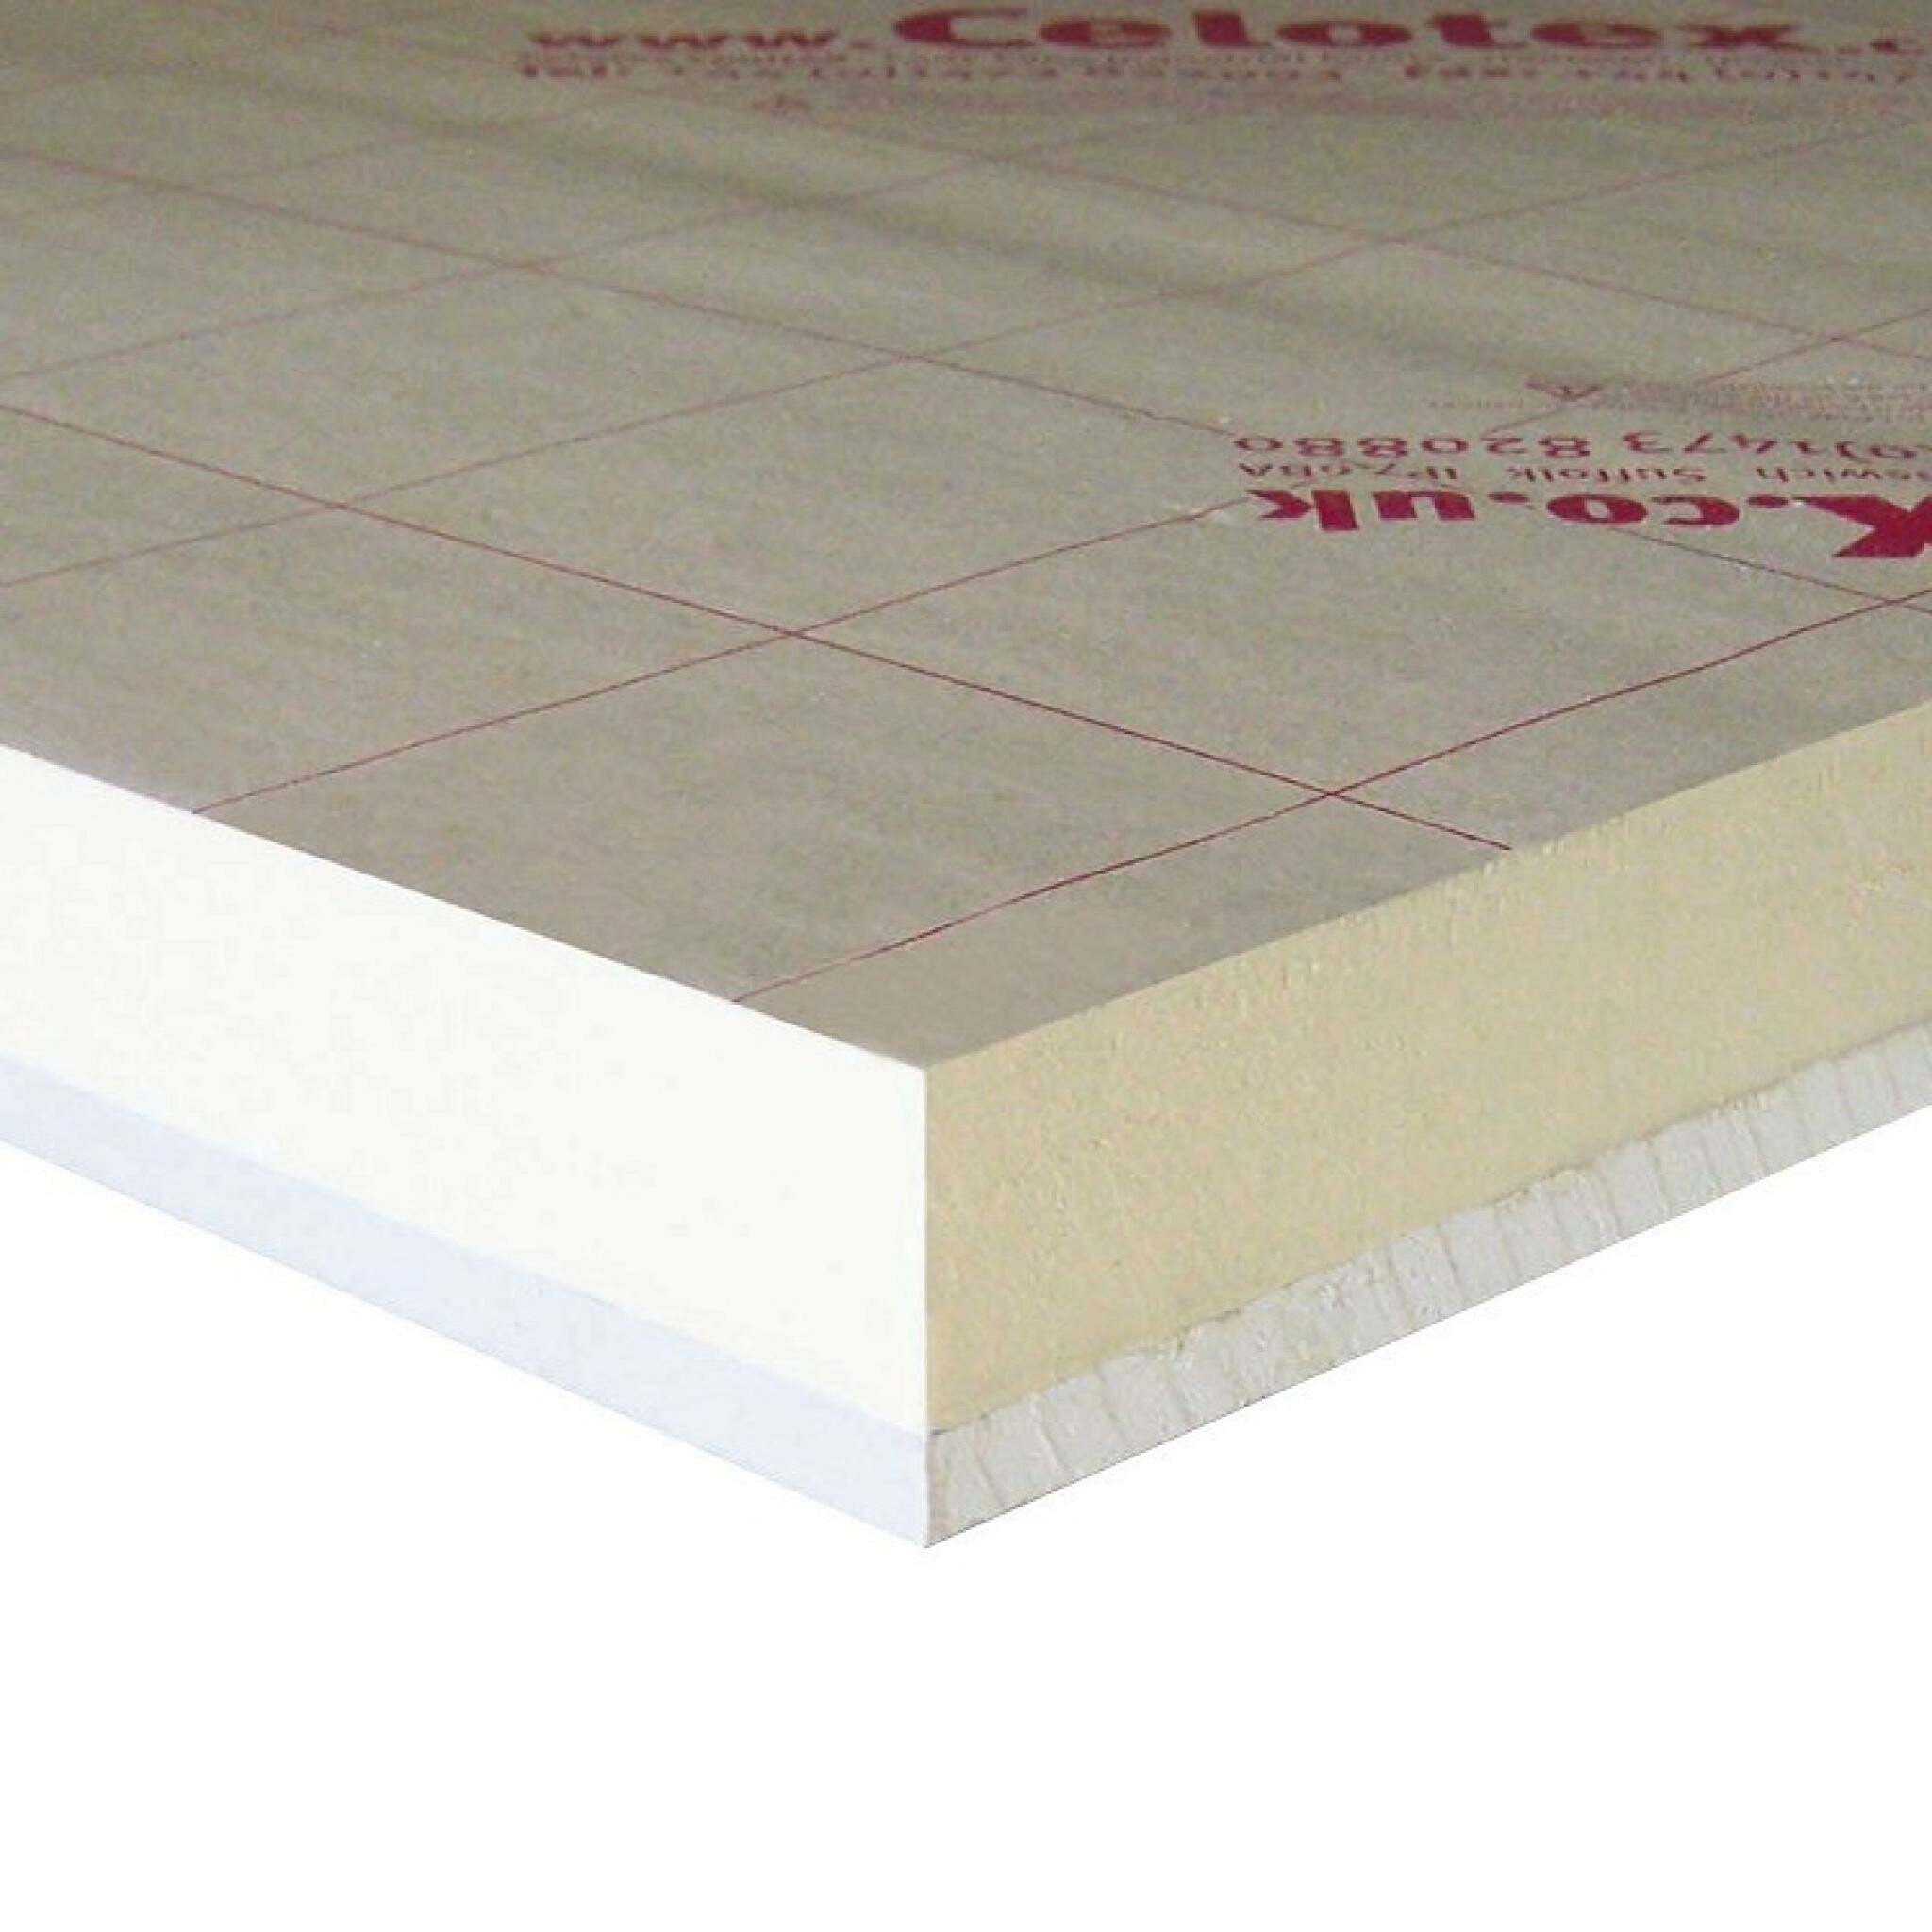 Insulated Plasterboards.jpg